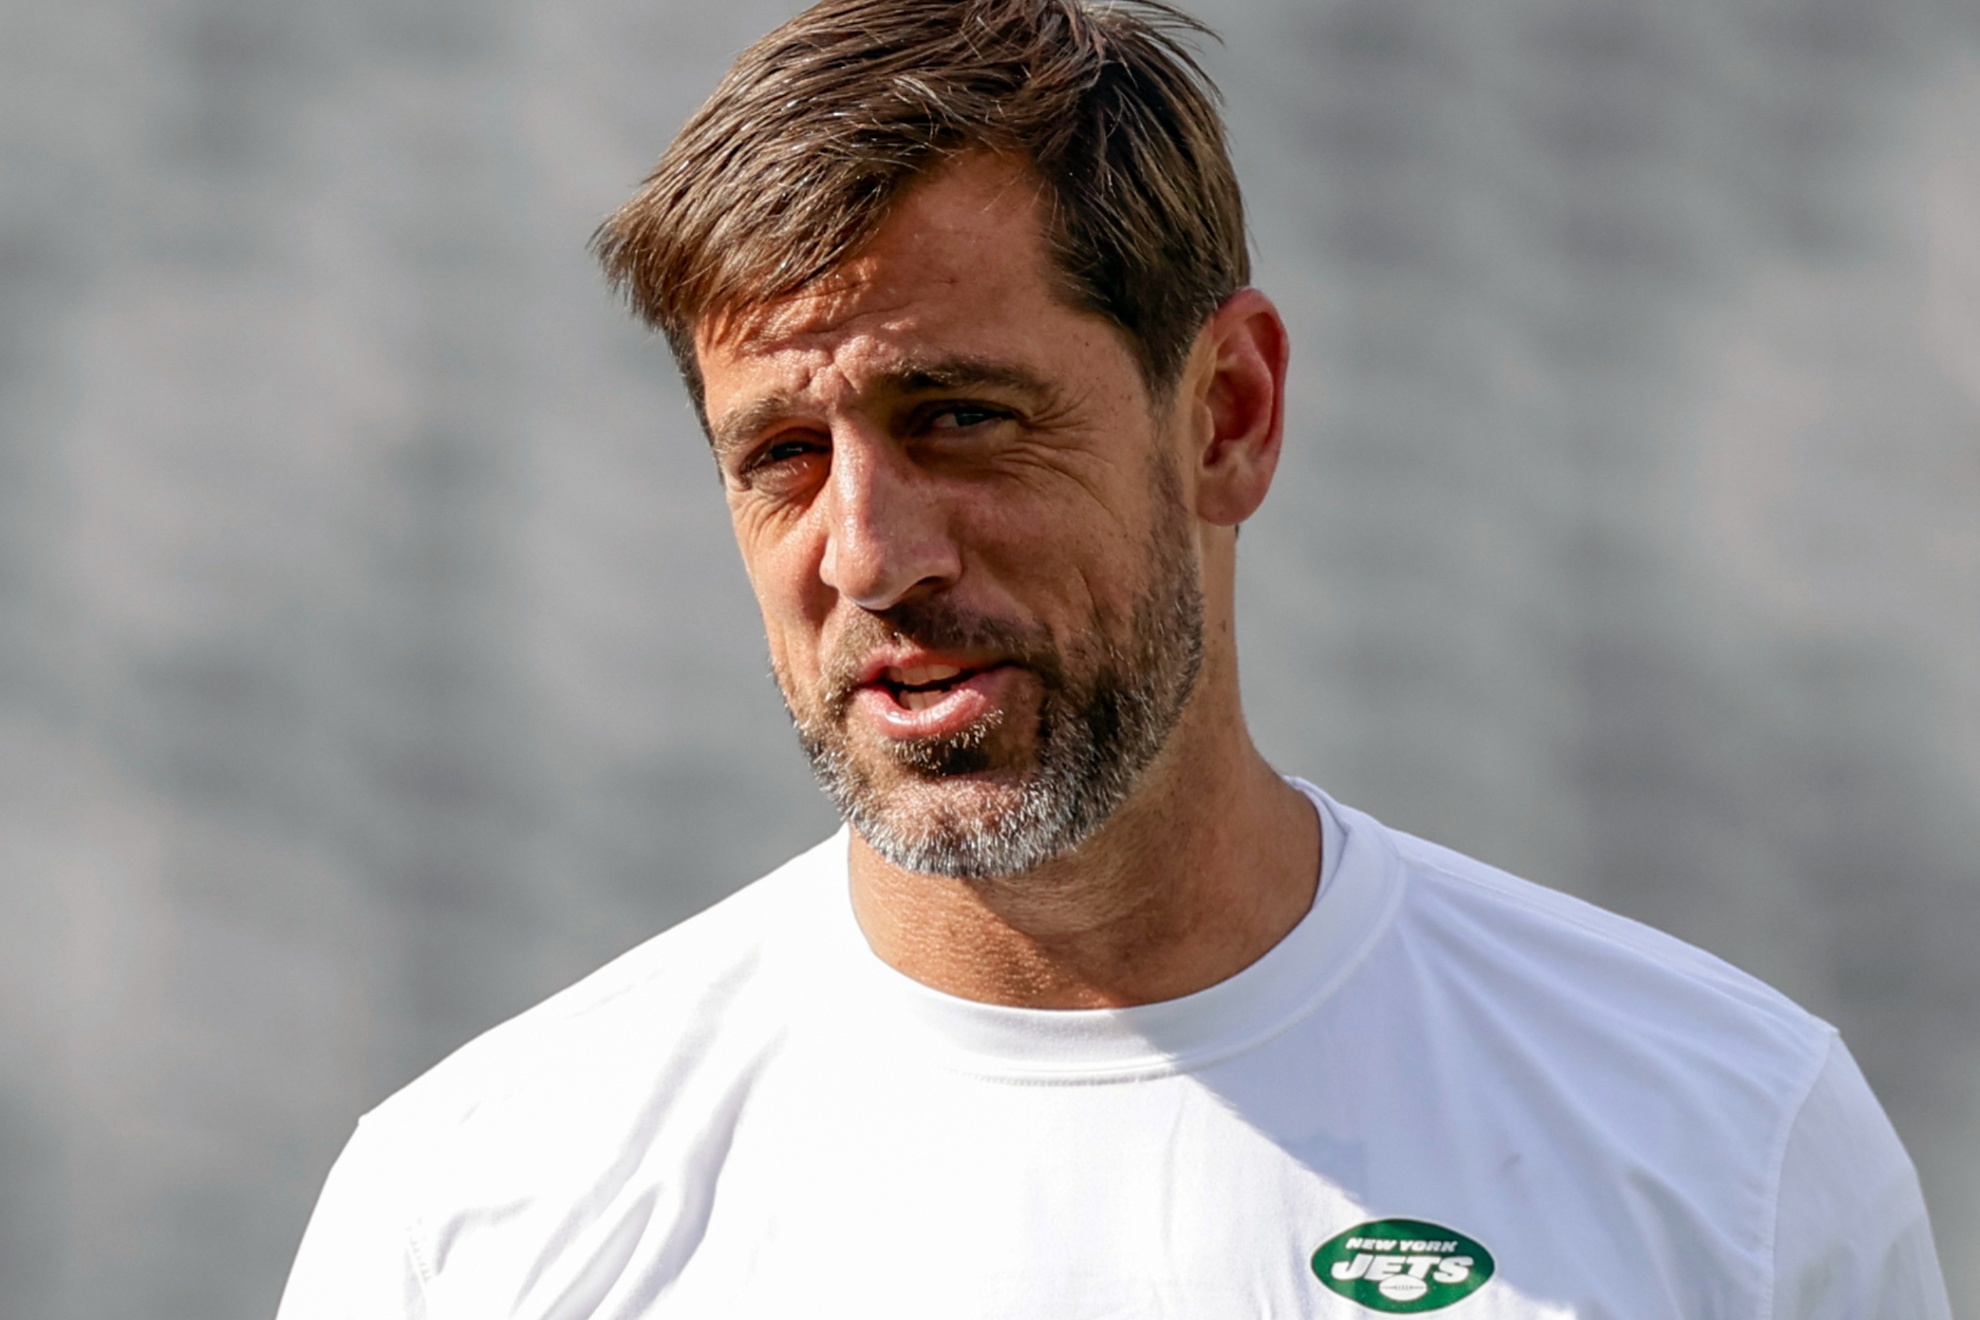 Aaron Rodgers, star quarterback of the New York Jets.